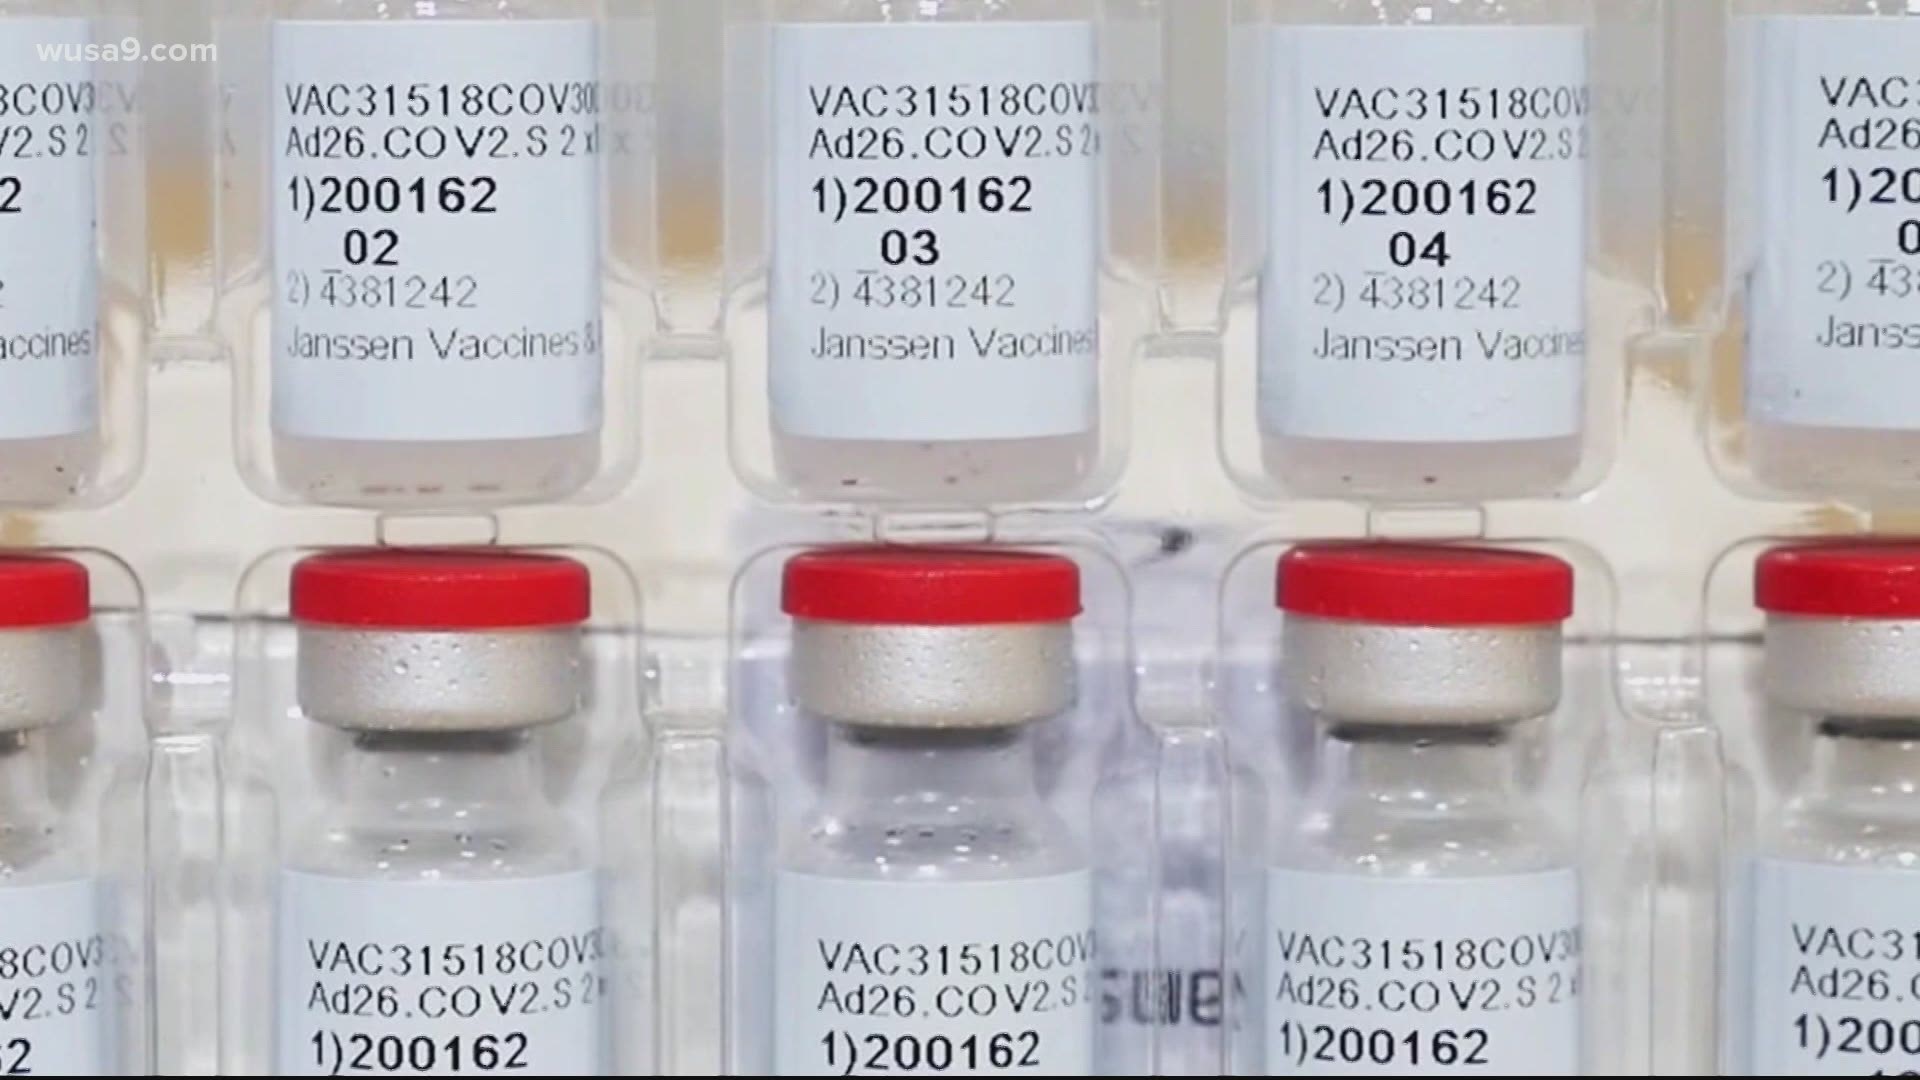 Here is a look at COVID-19 vaccine distribution issues being seen in DC, Maryland and Virginia.